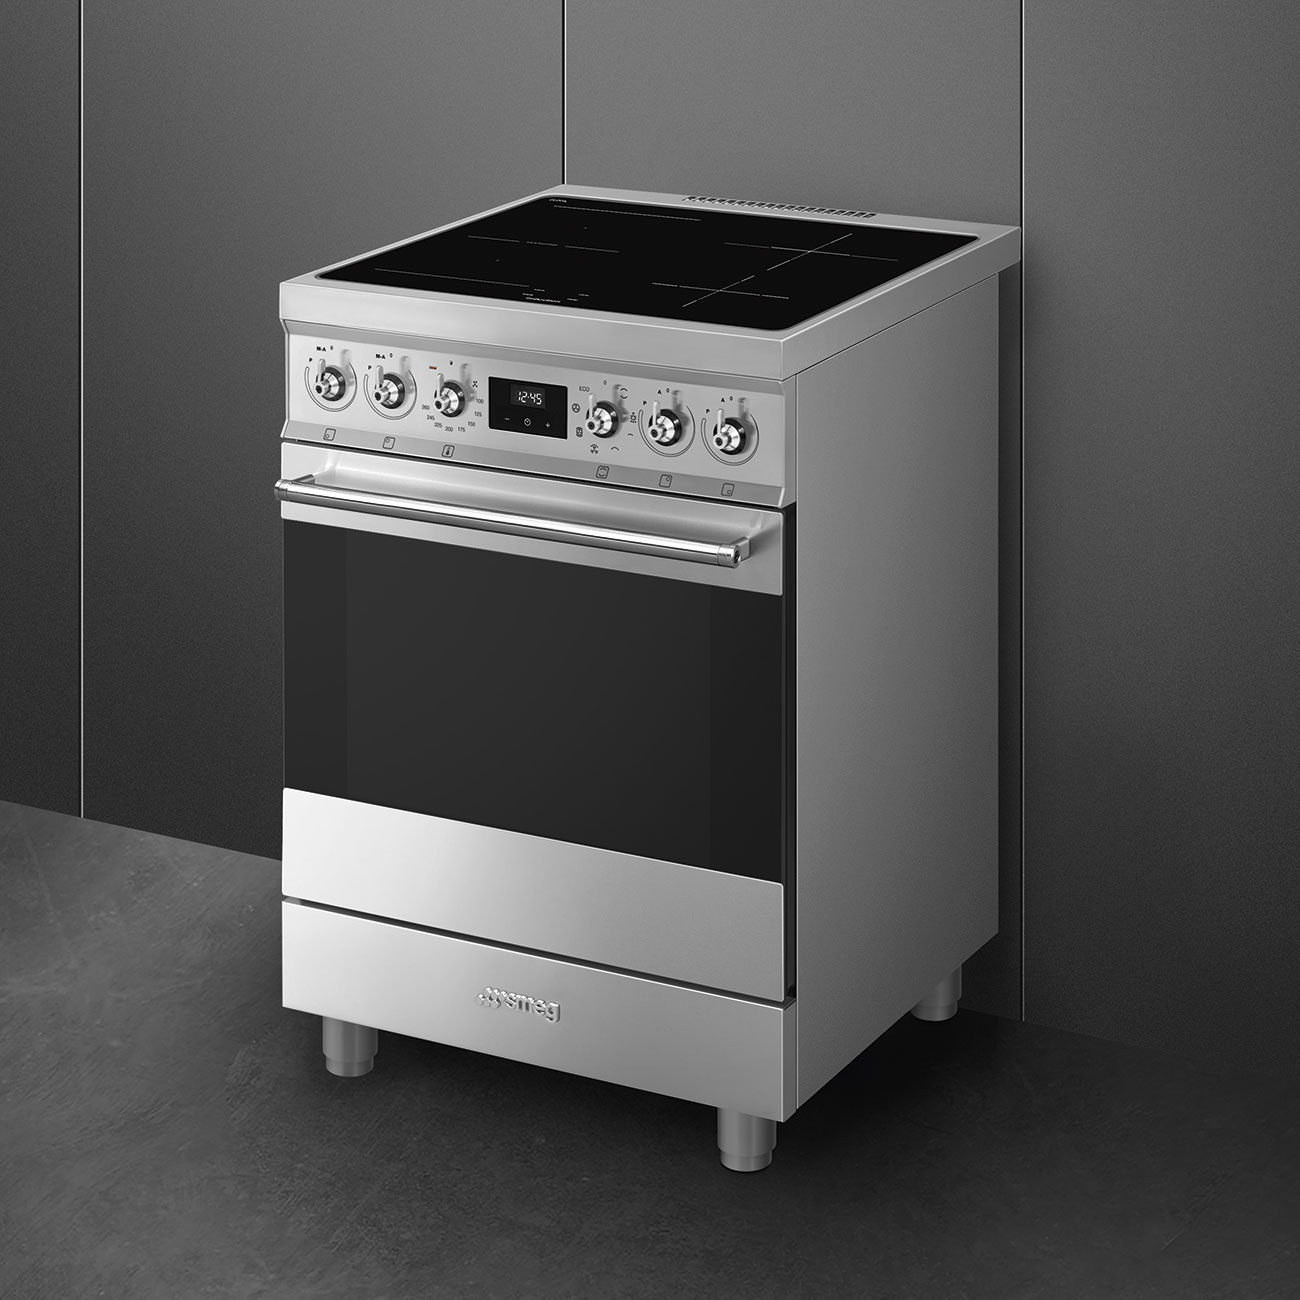 Smeg Stainless steel Cooker with Induction Hob_4